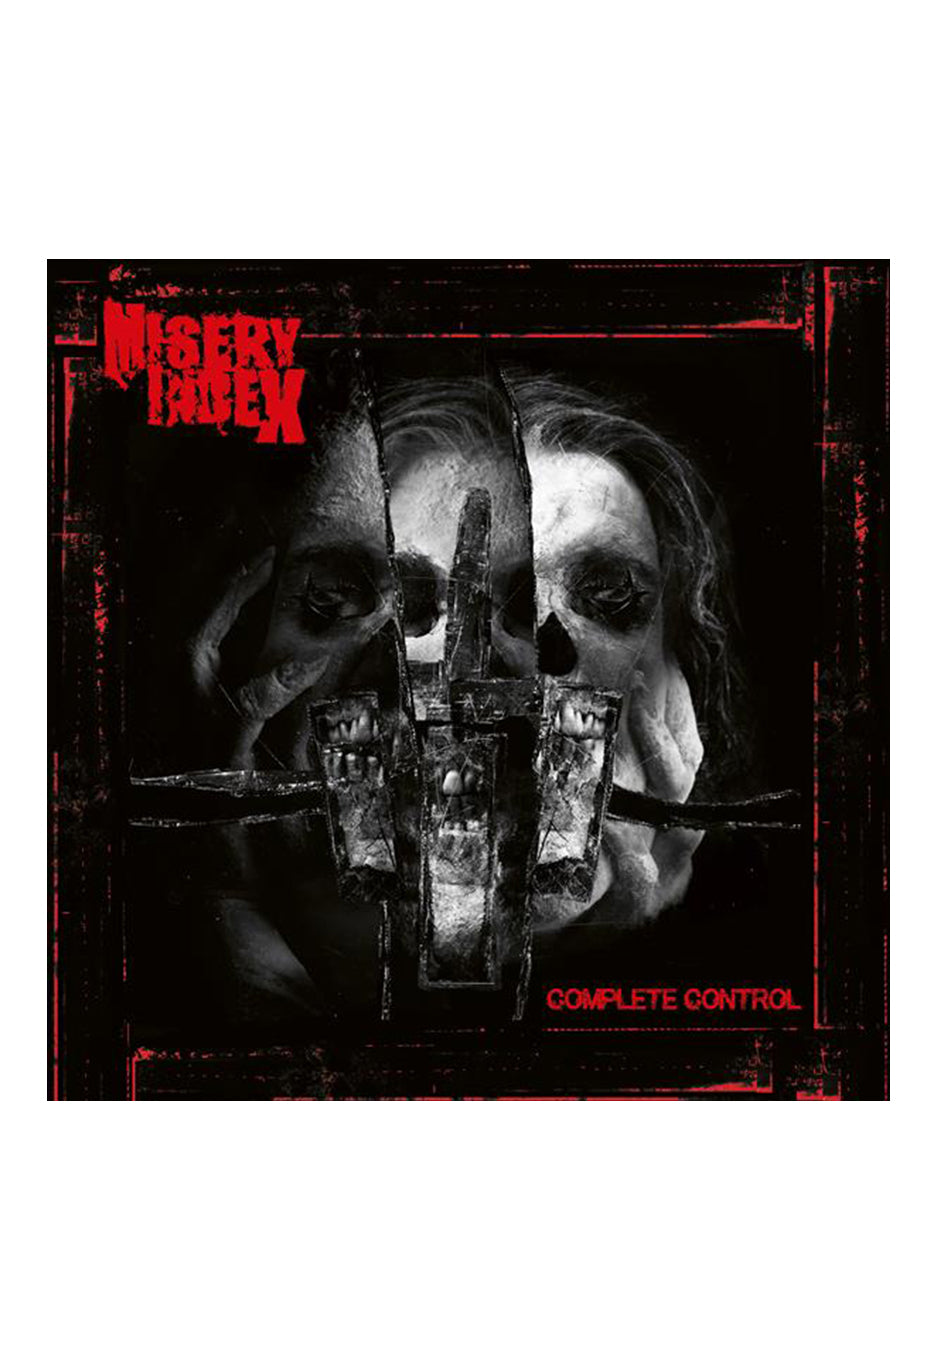 Misery Index - Complete Control Ltd. Deluxe - 2 CD Box